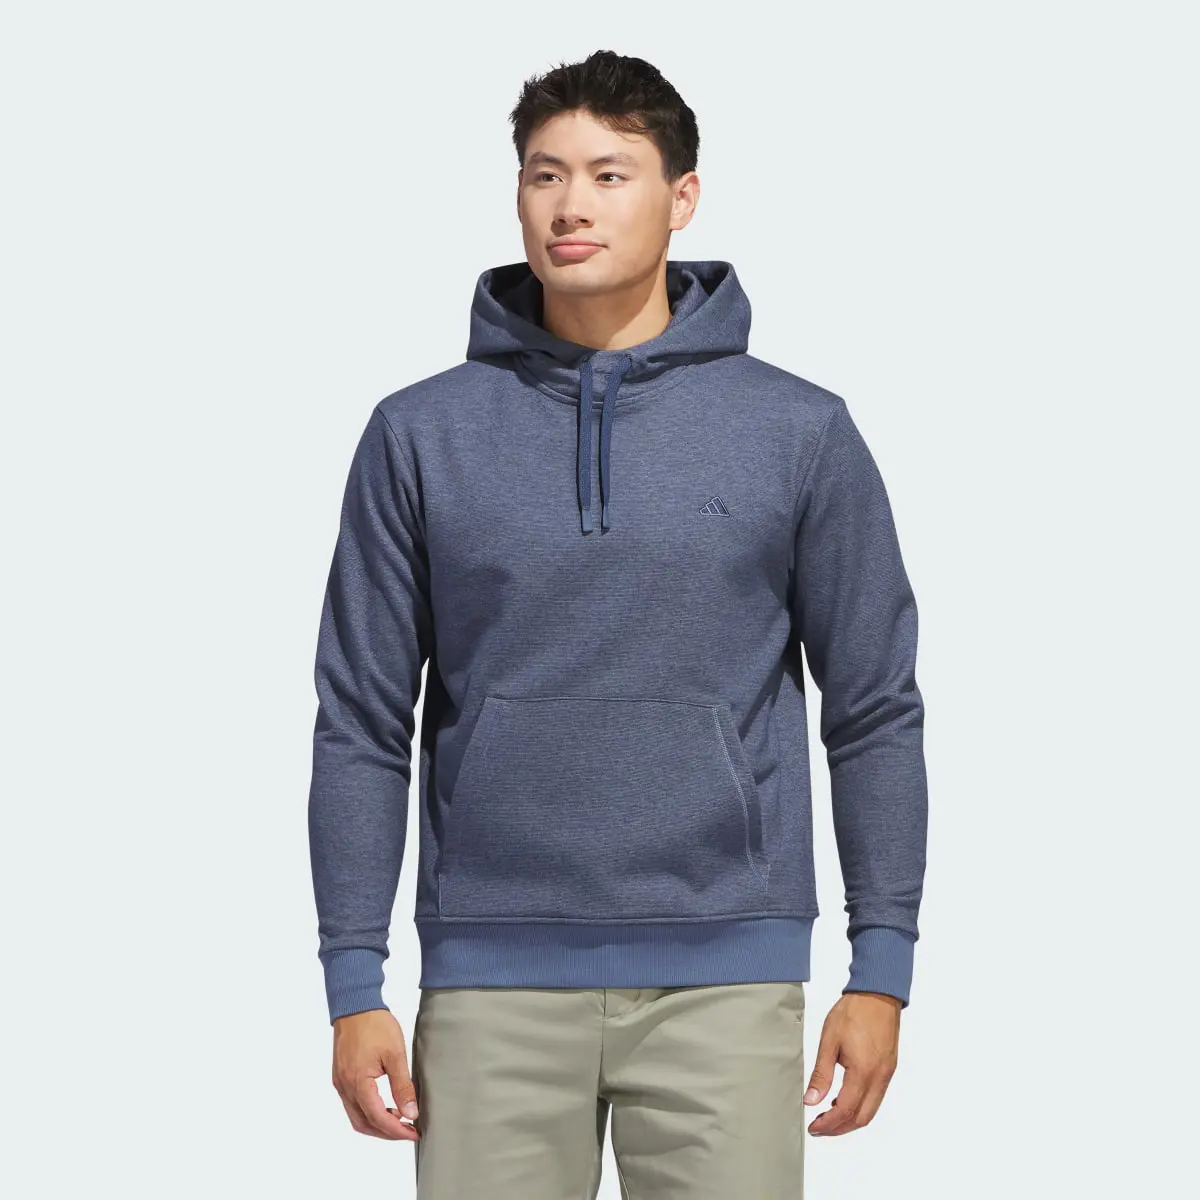 Adidas Go-To Hoodie. 2